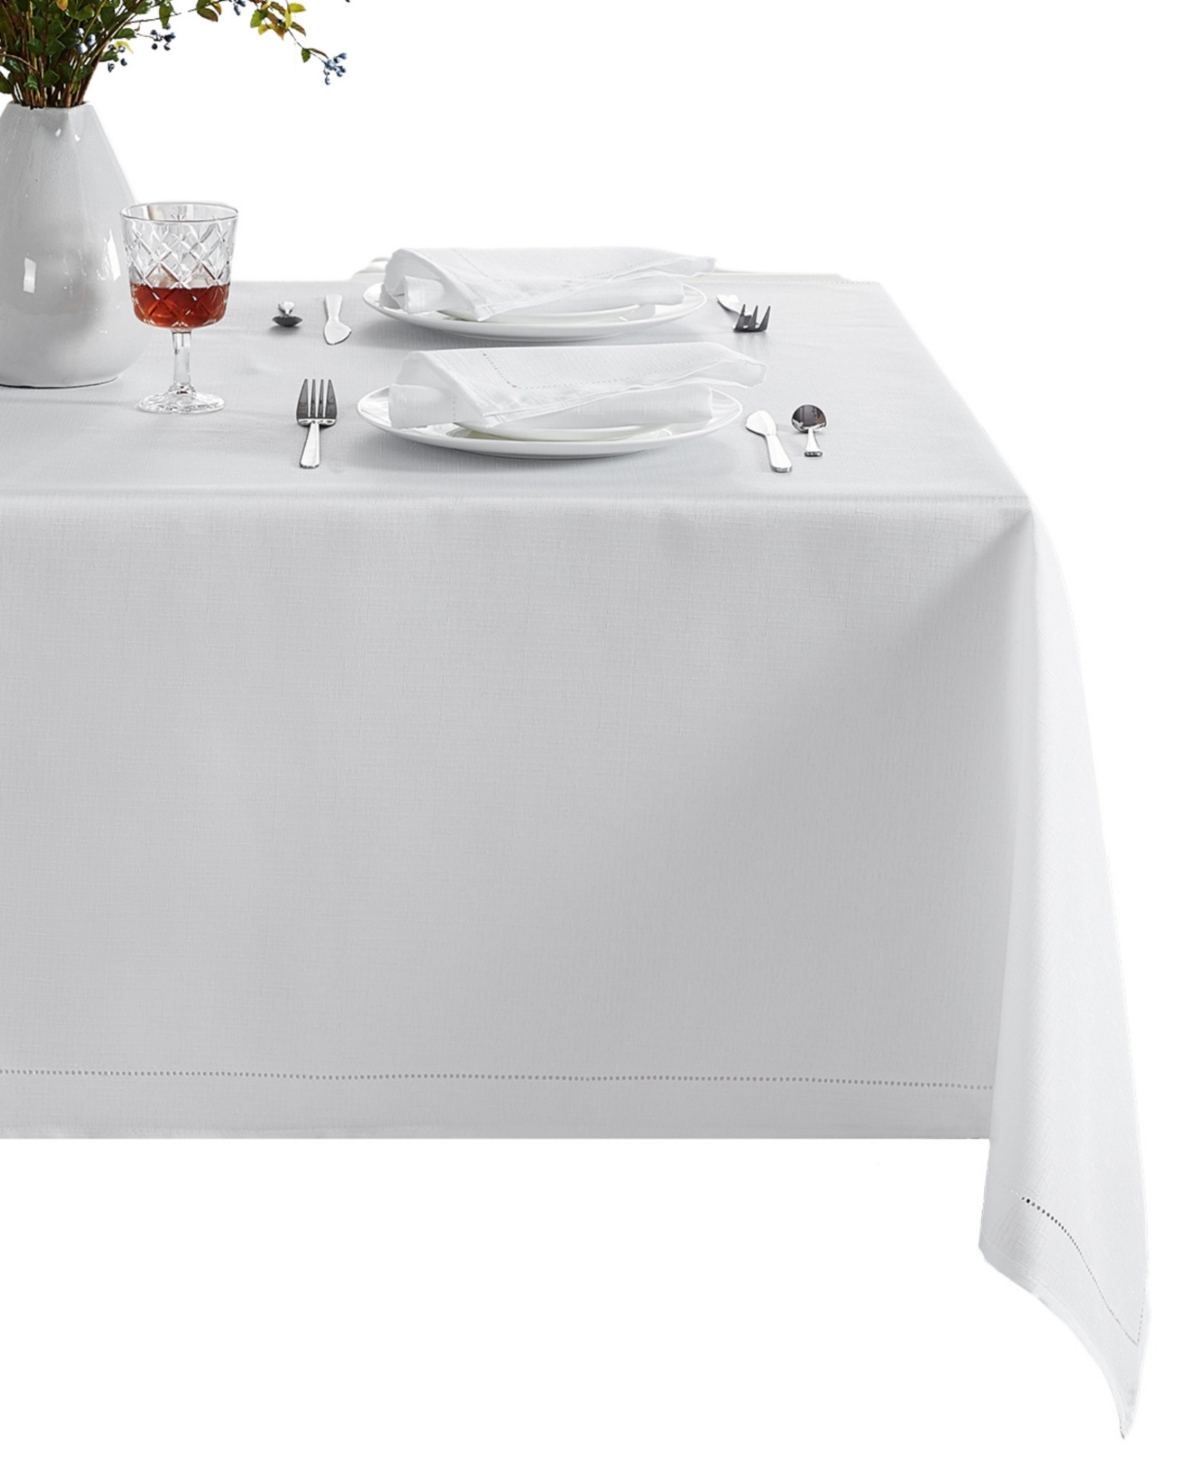 Elrene Alison Eyelet Punched Border Fabric Tablecloth, 60" X 84" In White